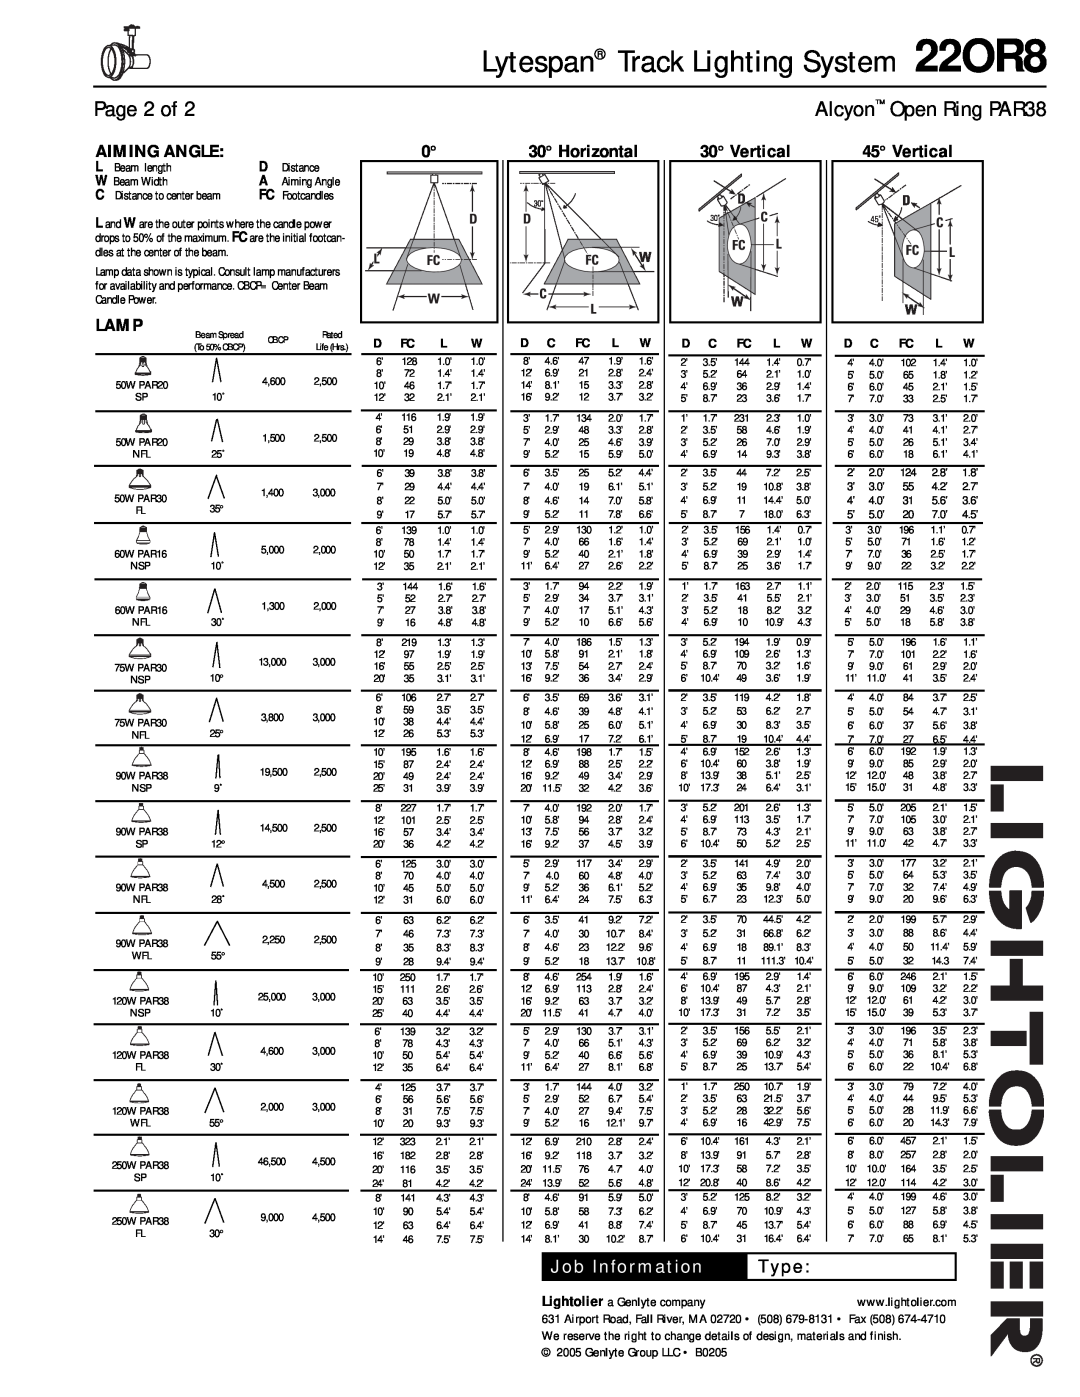 Lightolier 22OR8 manual Page 2 of, Aiming Angle, Horizontal, Lamp, Vertical, Type, Lytespan Track Lighting System 